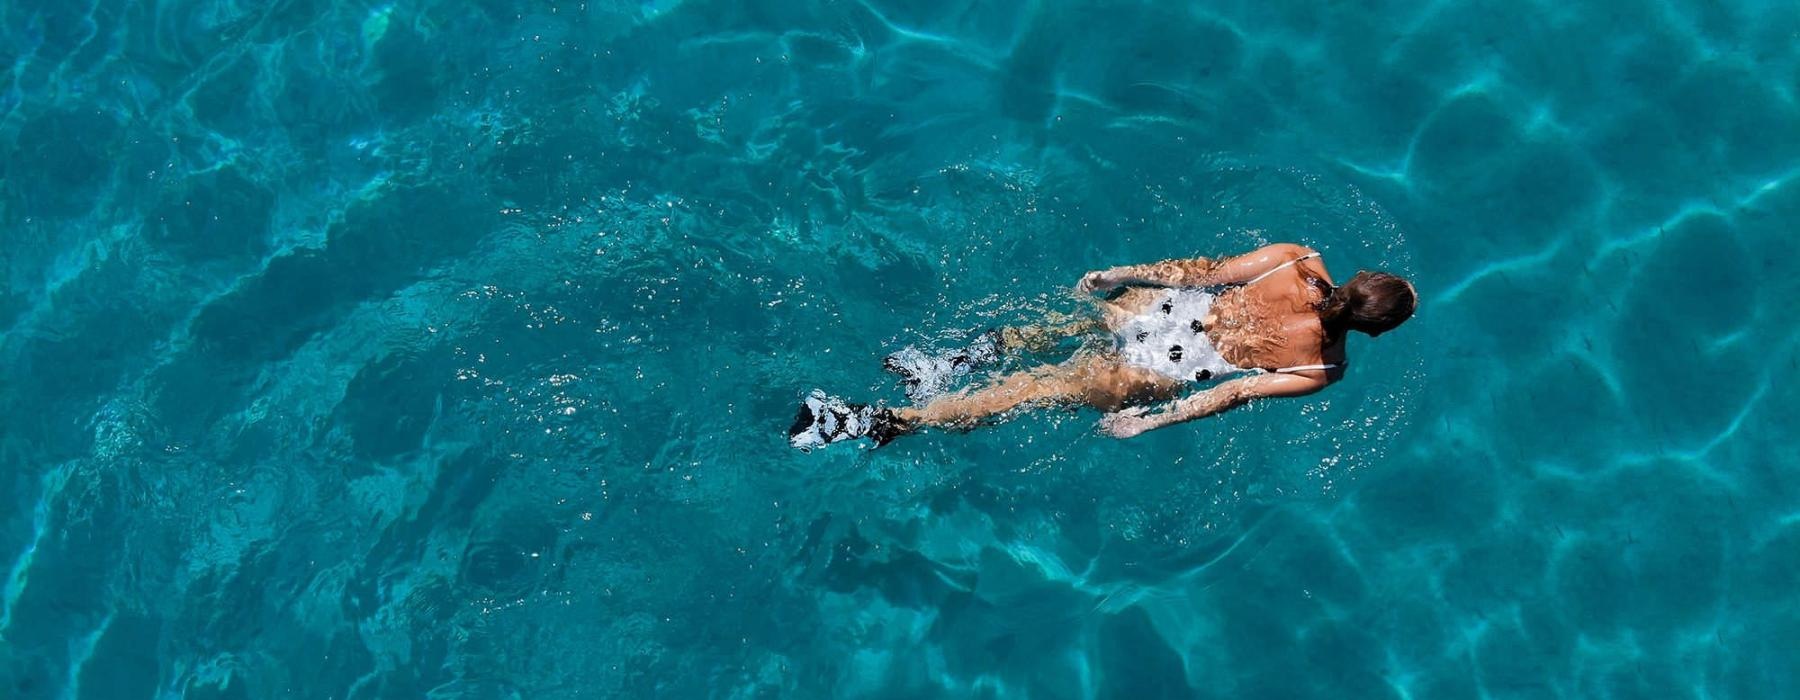 overhead shot of a woman swimming in a pool